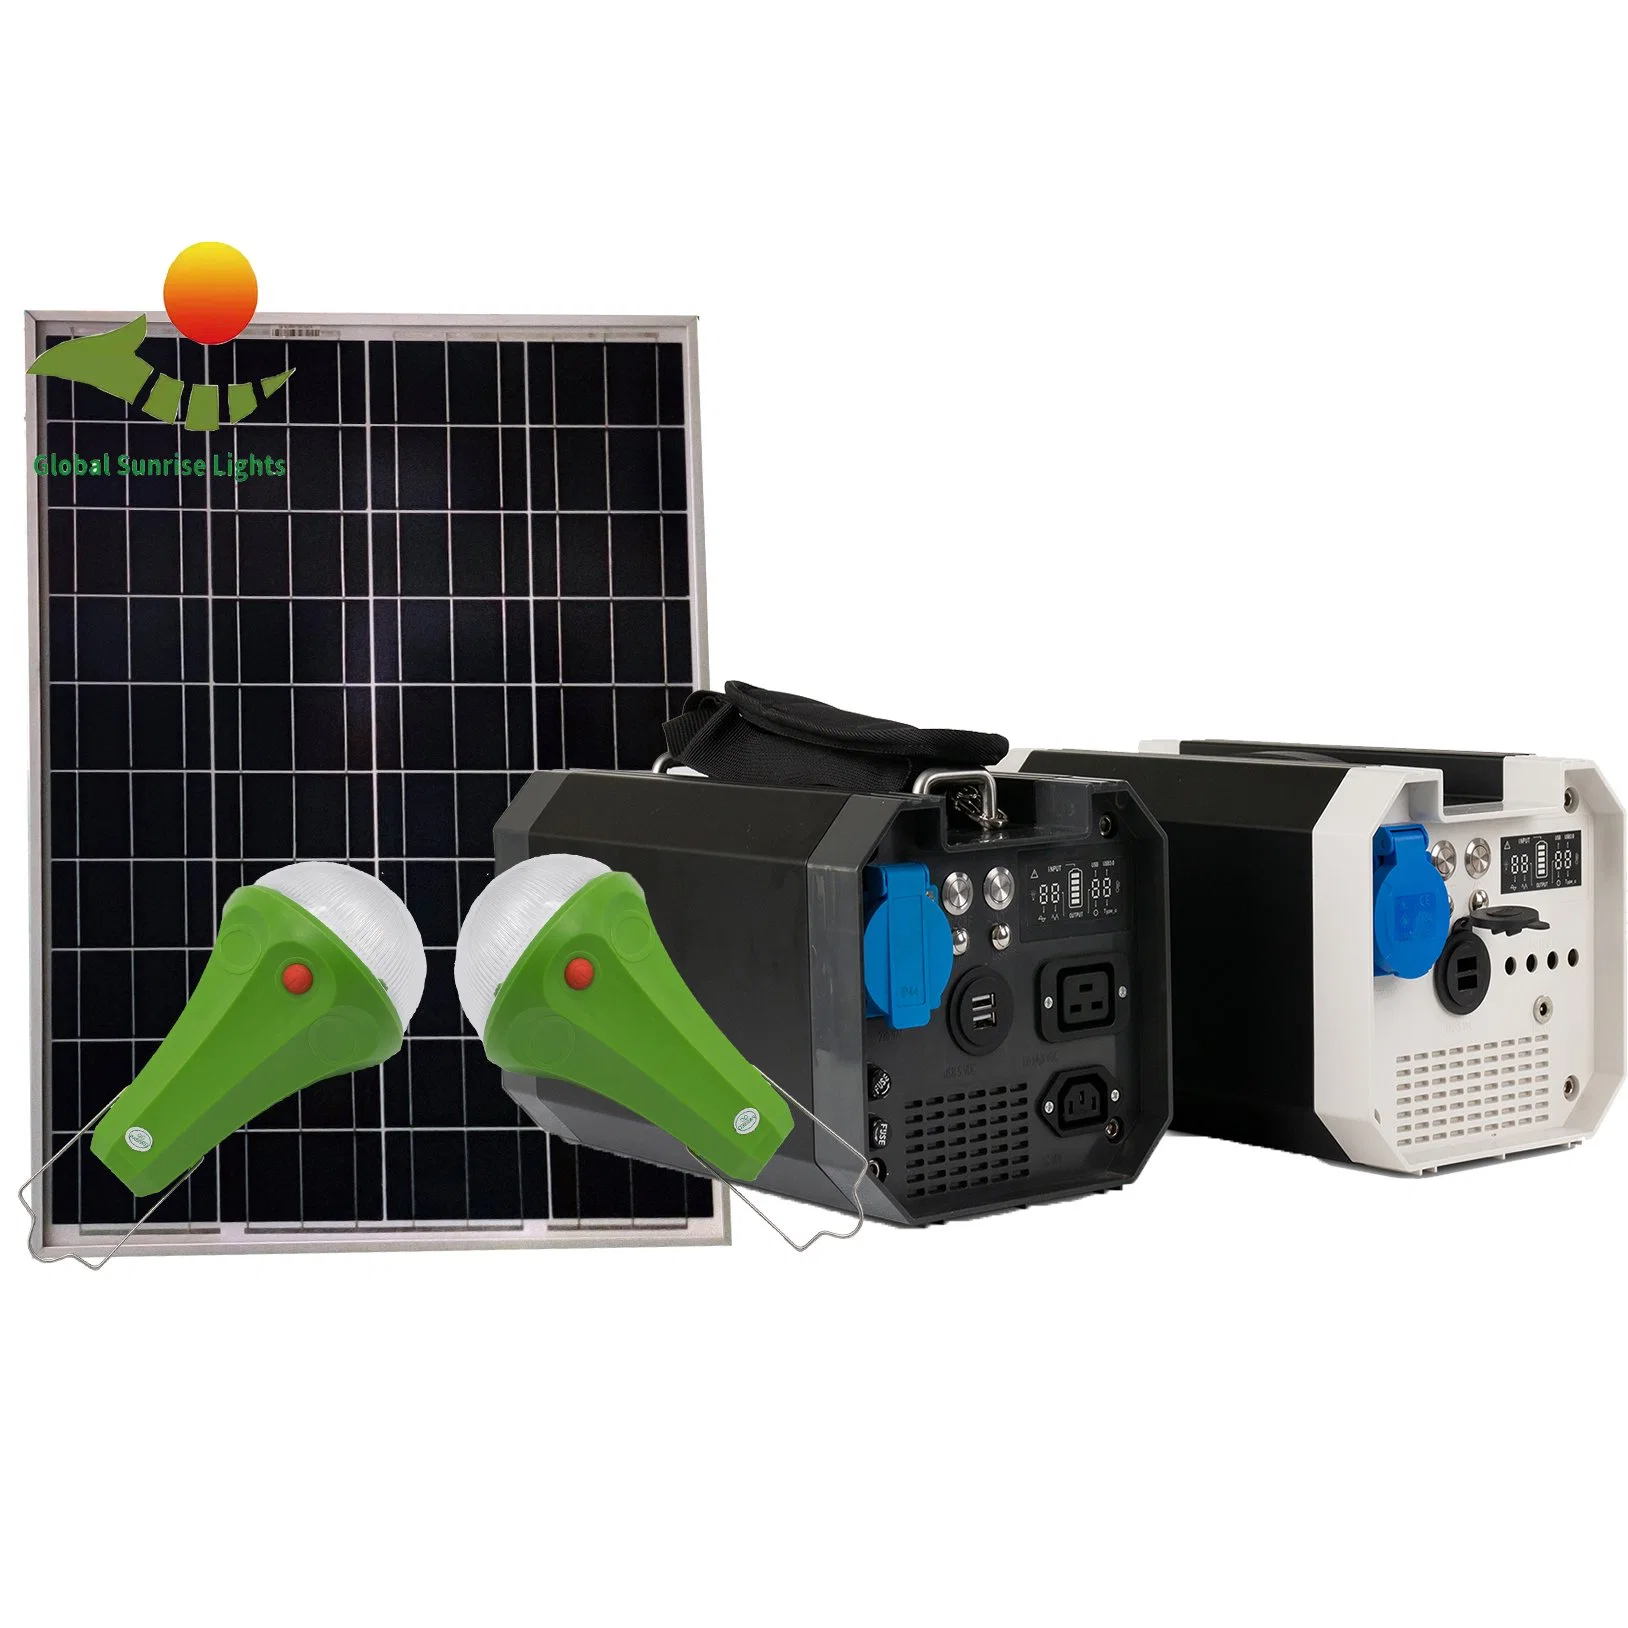 New Solar Power Outdoor Camping Portable Generator to Support Mobile Phone Charging